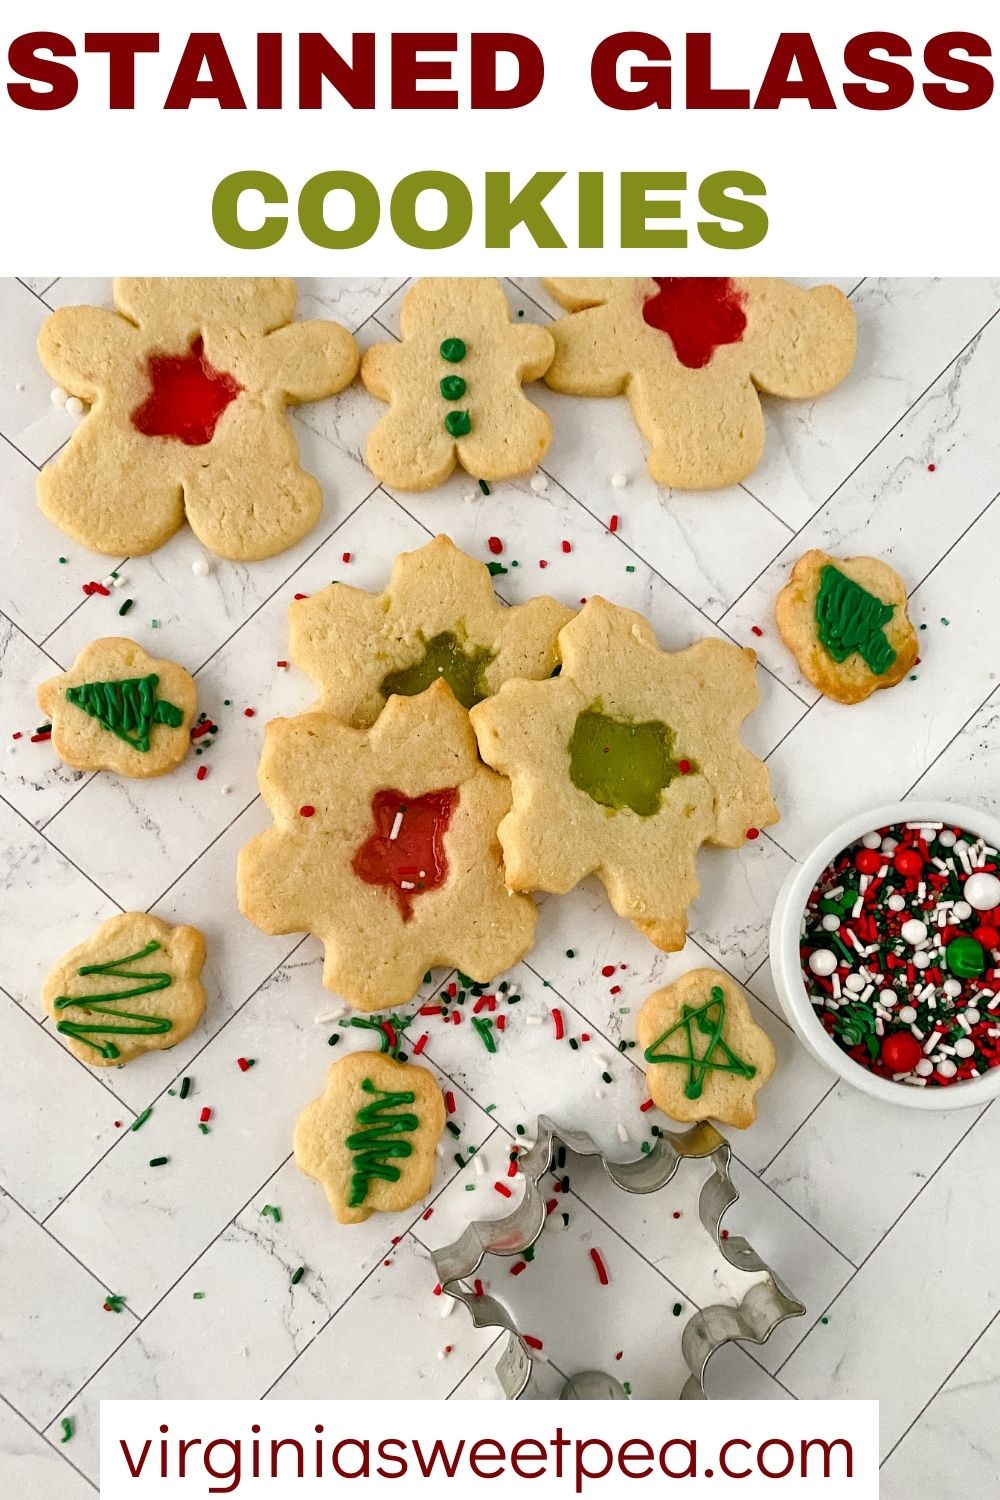 How to Make Stained Glass Cookies